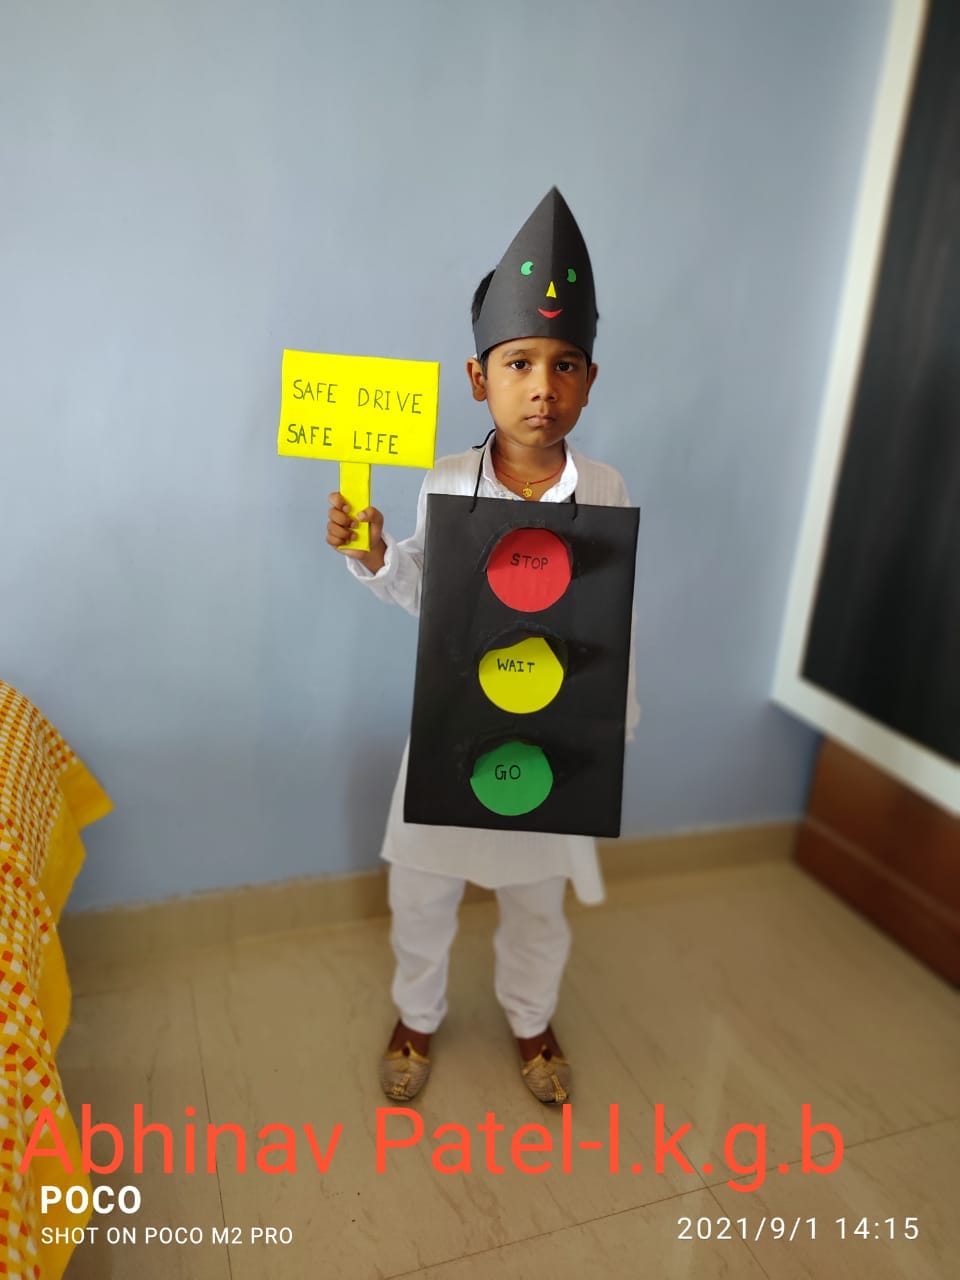 Buy Kkalakriti Traffic Signal Redlight Fancy Dress Costume With Hood For  Kids For 3-6yrs Online at Low Prices in India - Amazon.in